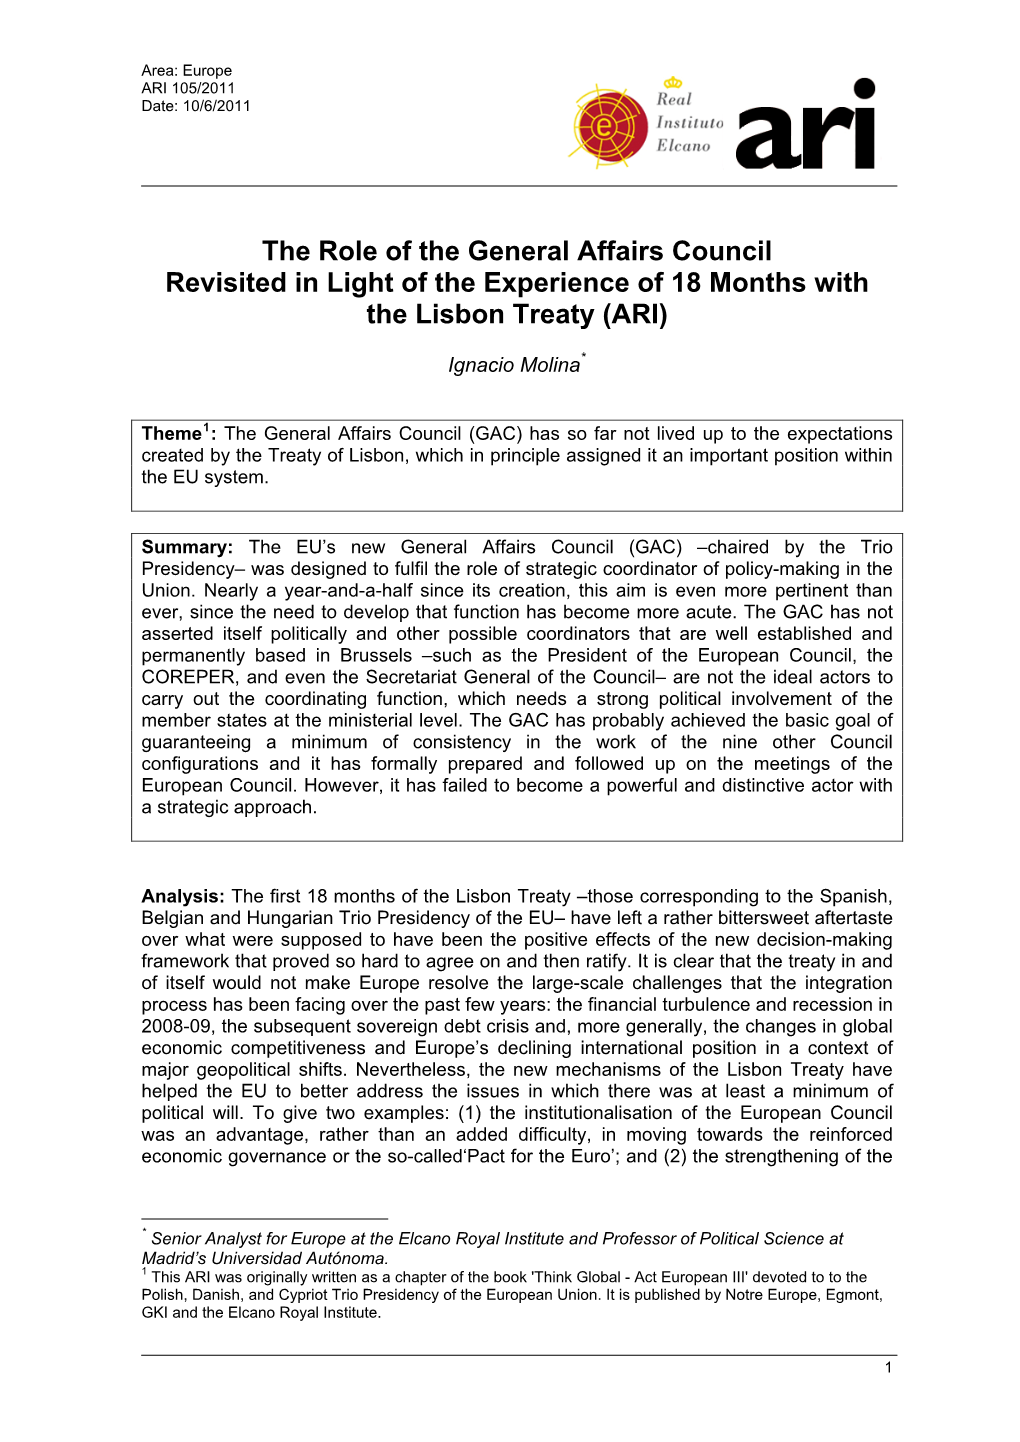 The Role of the General Affairs Council Revisited in Light of the Experience of 18 Months with the Lisbon Treaty (ARI)